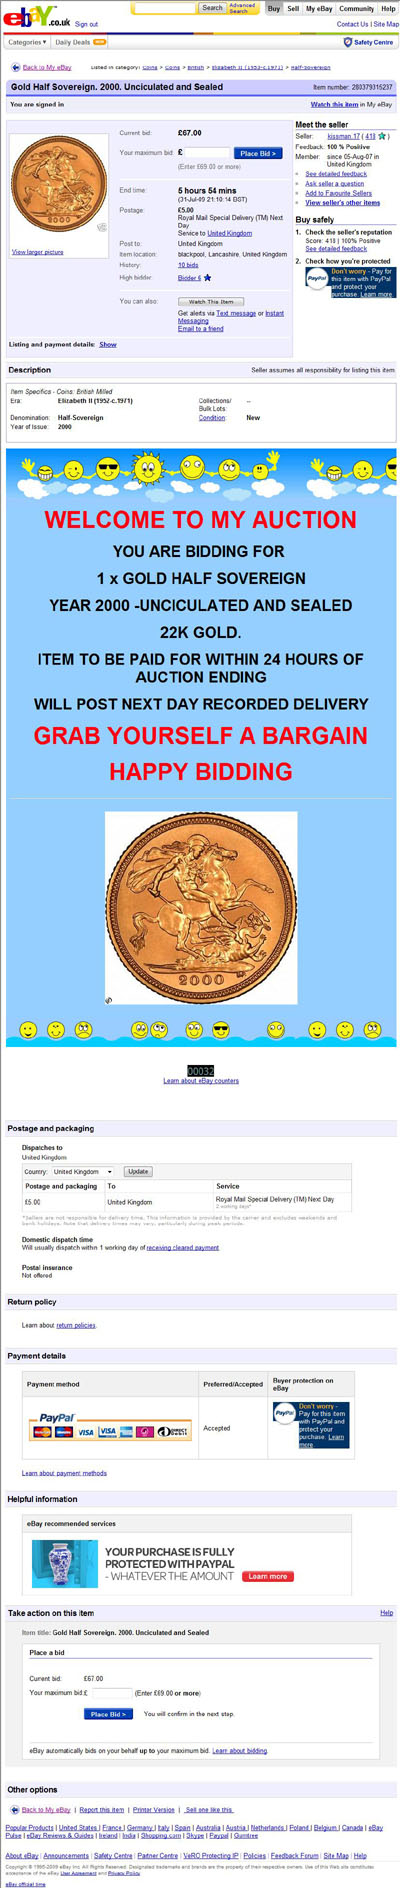 kissman.17 Using Our Mint Condition 2008 Beijing London Handover £2 Silver Proof Image in eBay Auctions